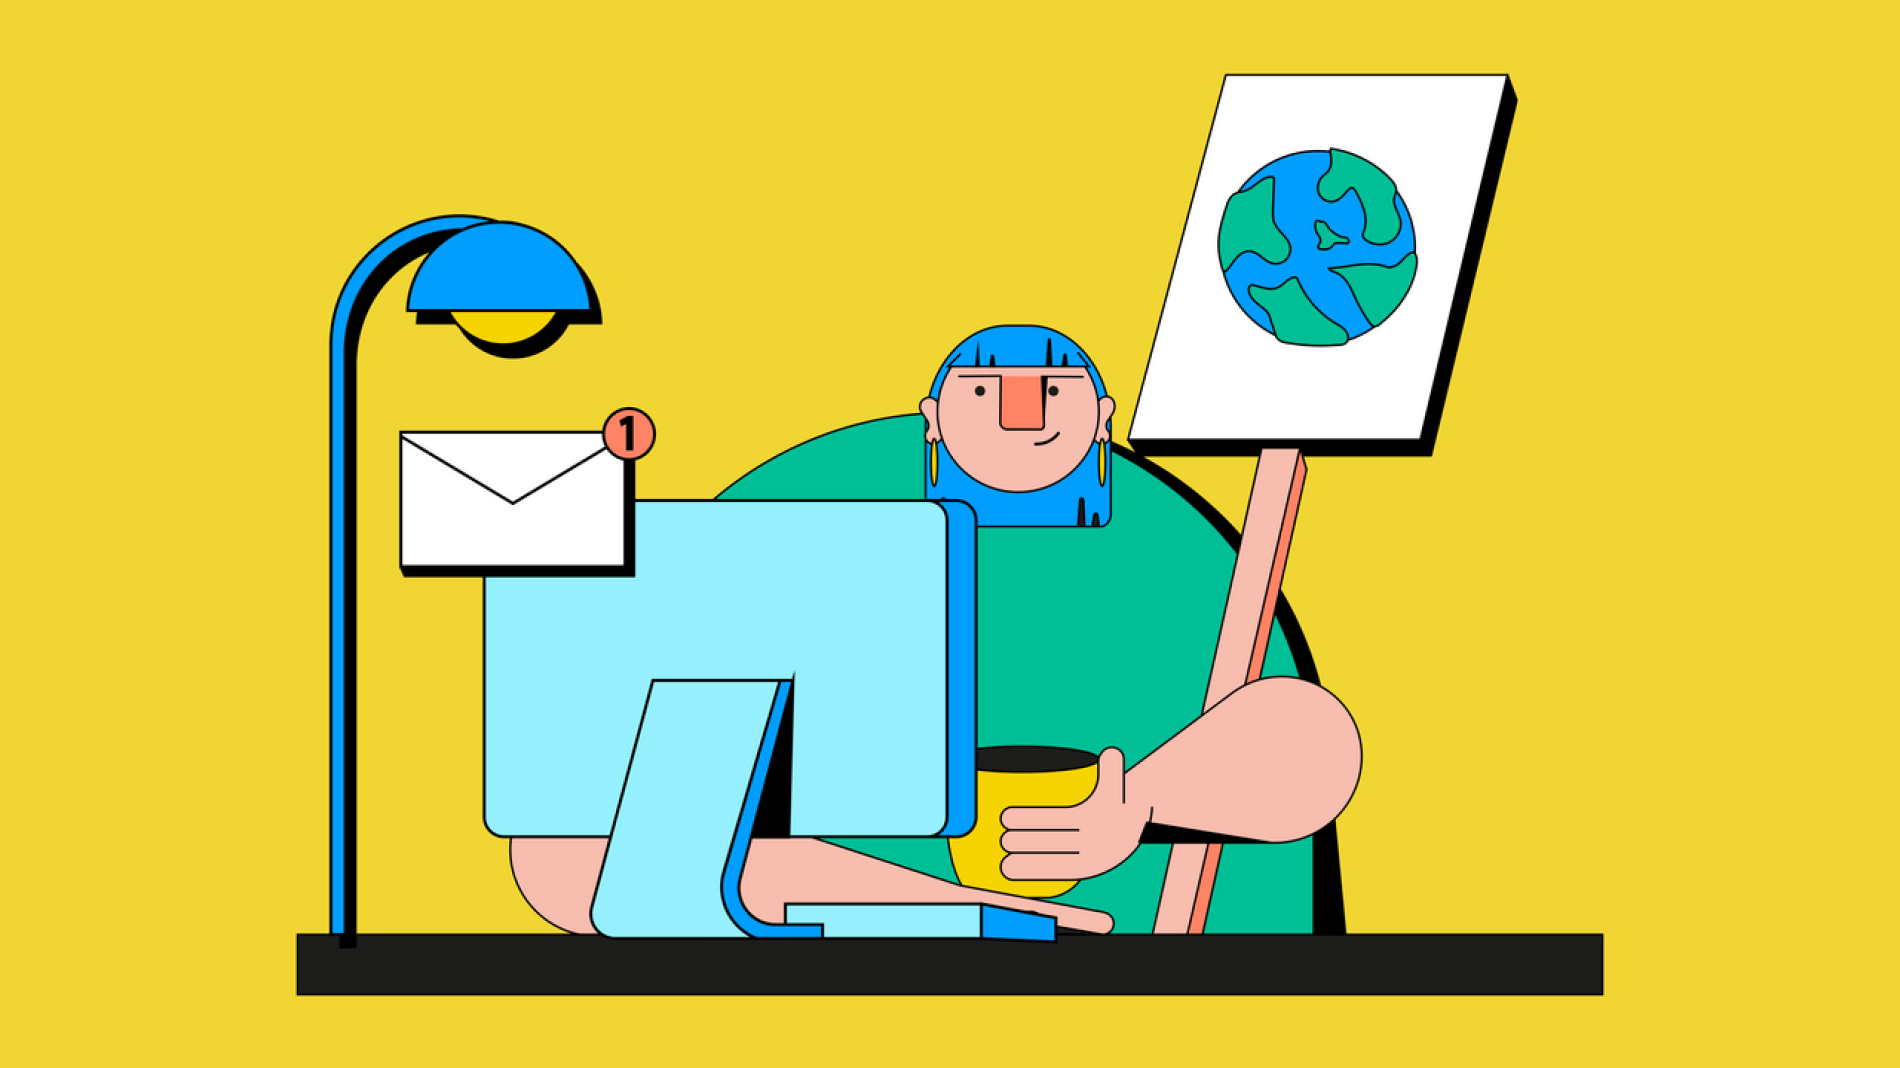 Illustration of a person in front of a computer while holding a sign with a drawing of the earth on it